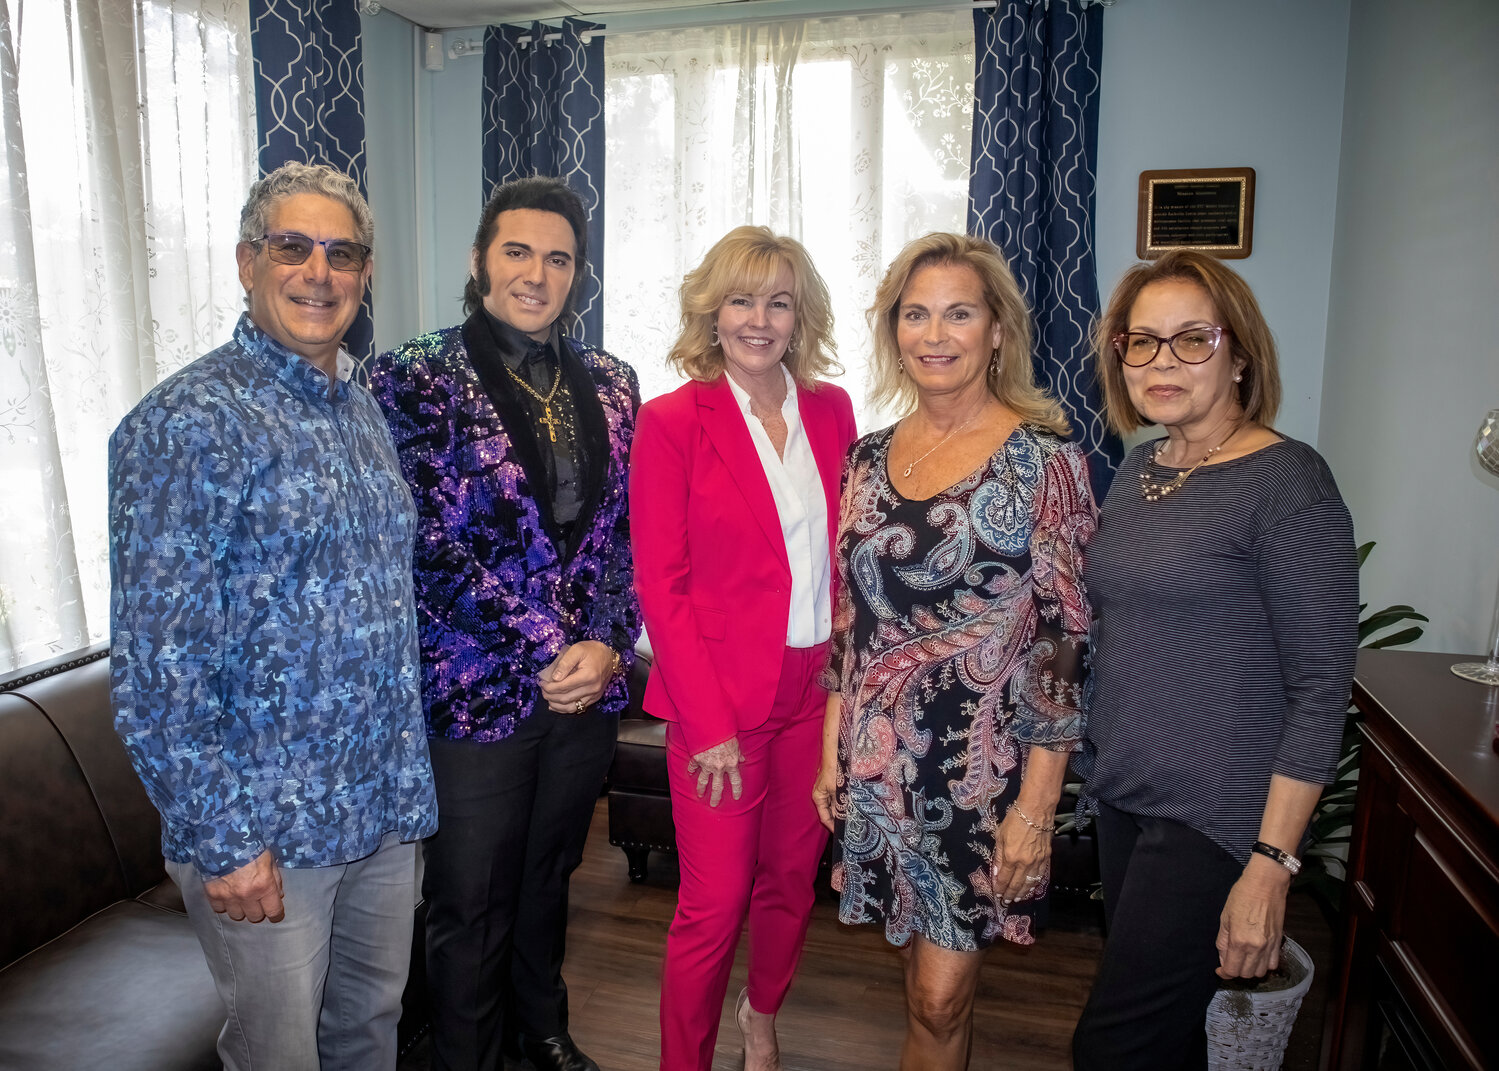 FOSSI President Bruce Mirkin, left, joins Tom Jones impersonator Lamar Peters, Sandel Center Deputy Director Nancy Codispoti, Janet Fex with Grand Pavilion Rehabilitation, and FOSSI Secretary Yndiana Seltzer for a special performance at the Sandel Senior Center on May 19.